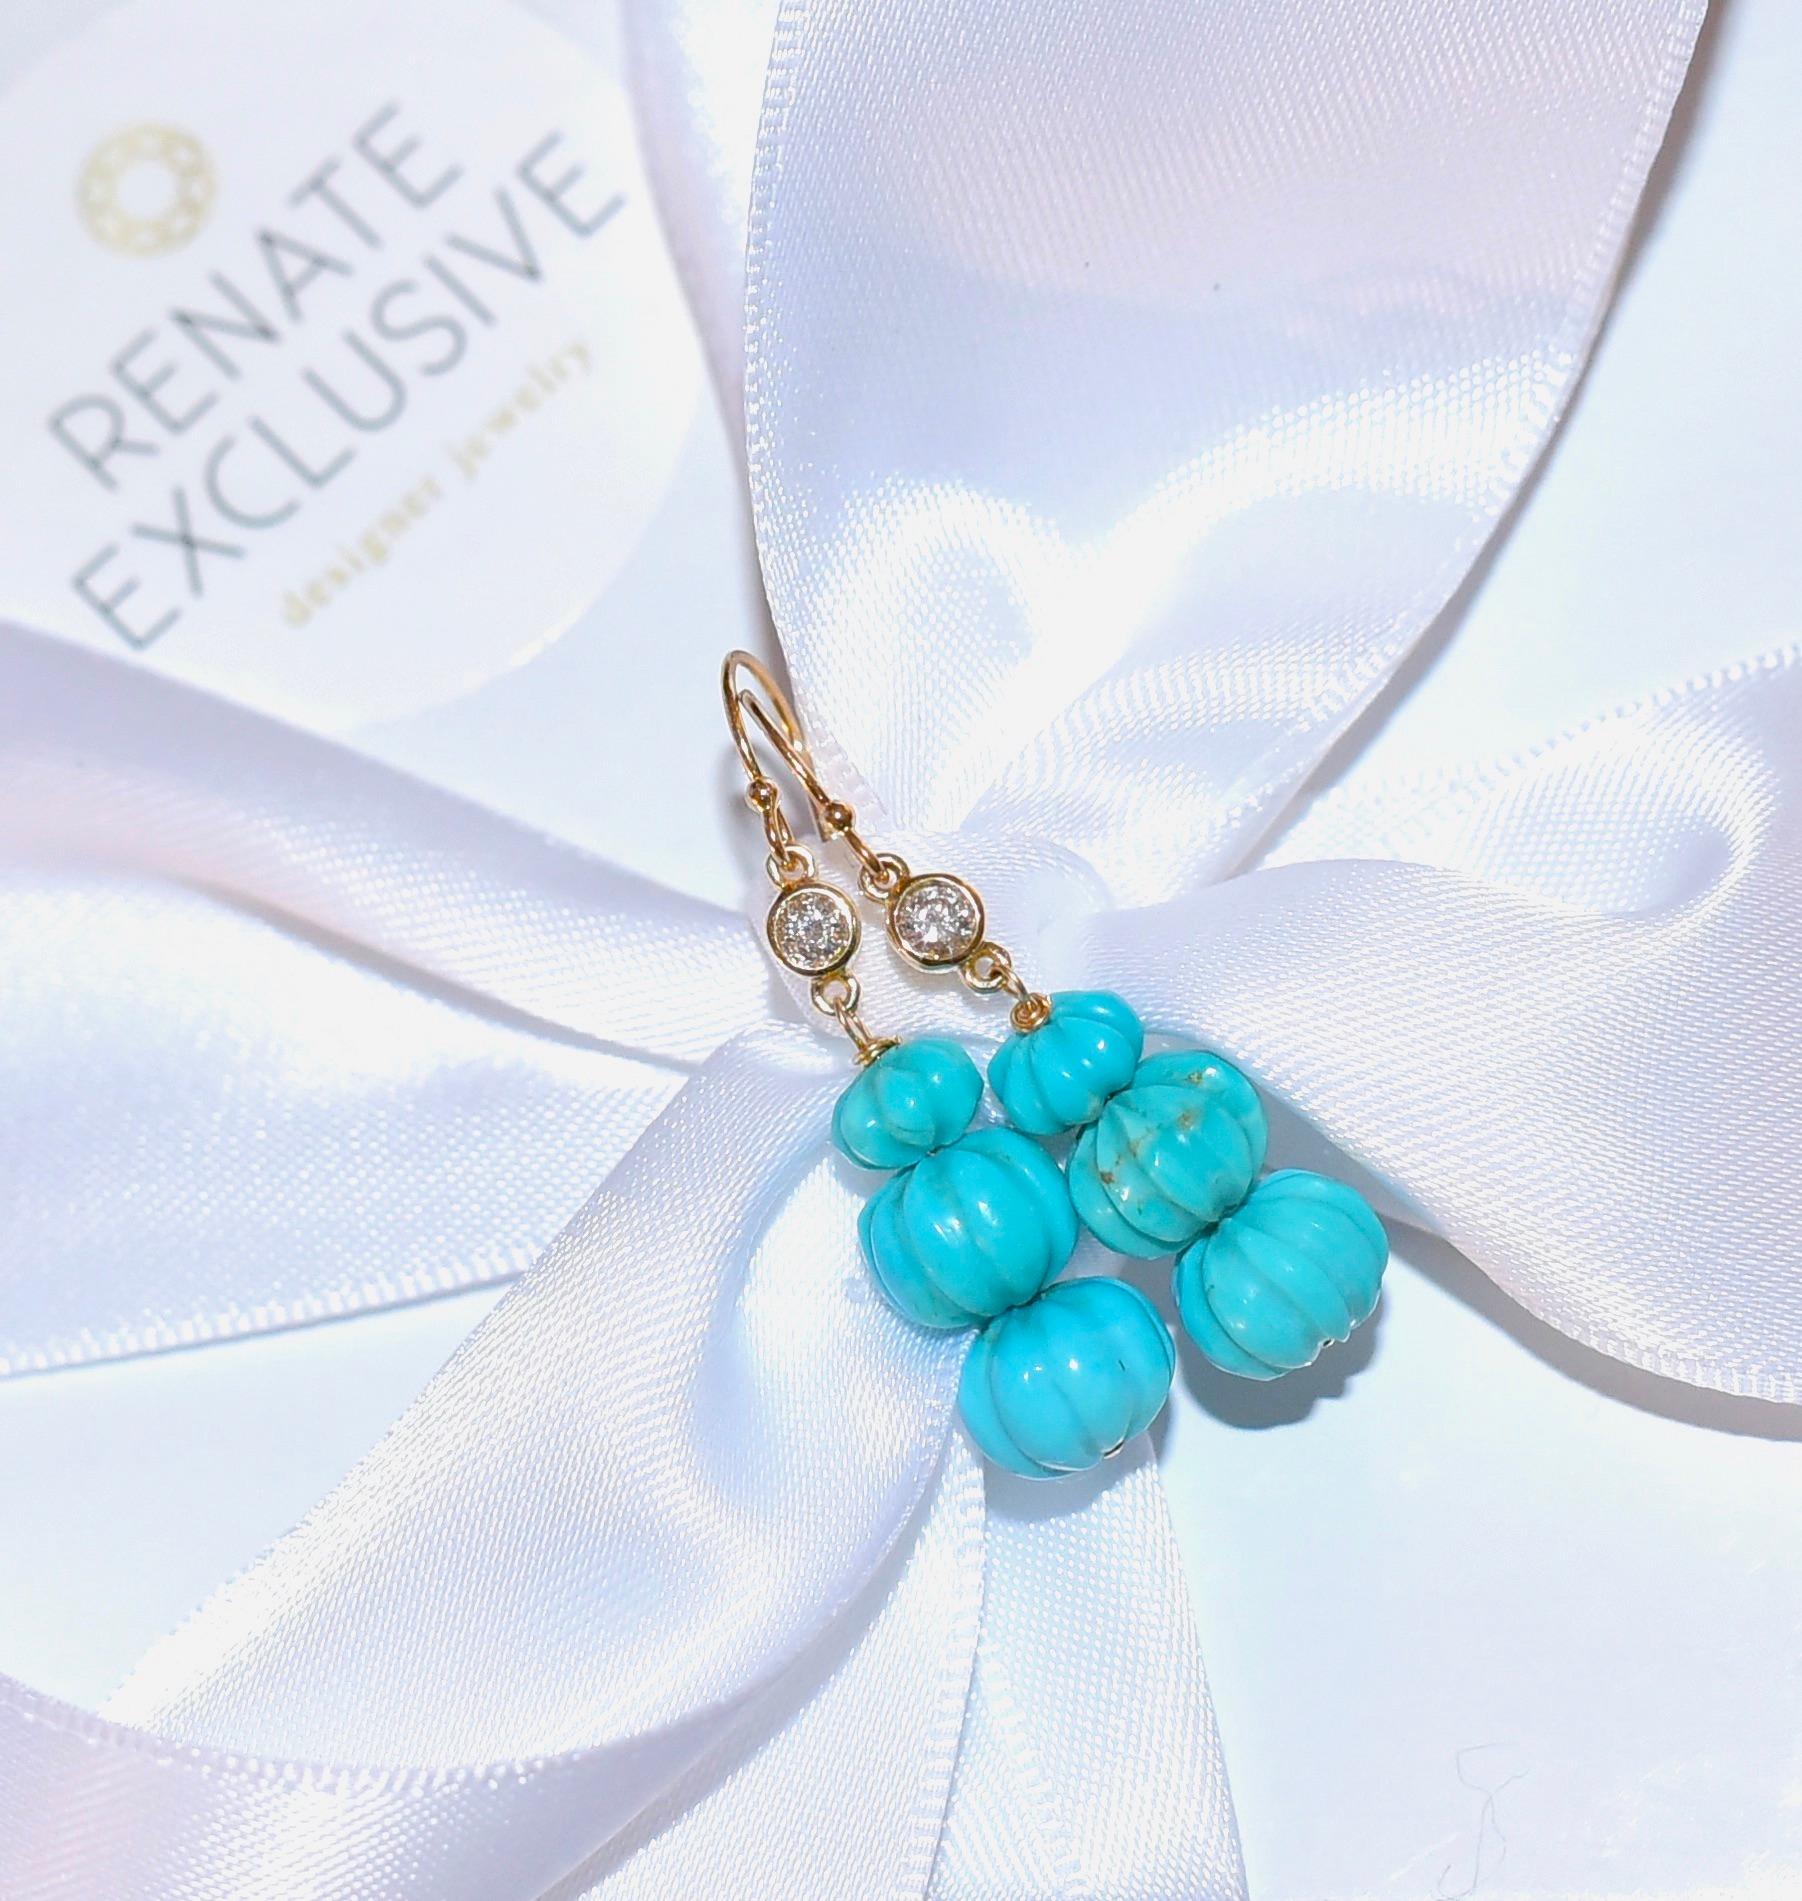 These precious earrings were created from Kingman Turquoise and look at the fun part because they look like melon! The earring strikes a special shine genuine 14K solid yellow gold diamond bezel connector with 0.10 carat white diamonds. 
Beautiful